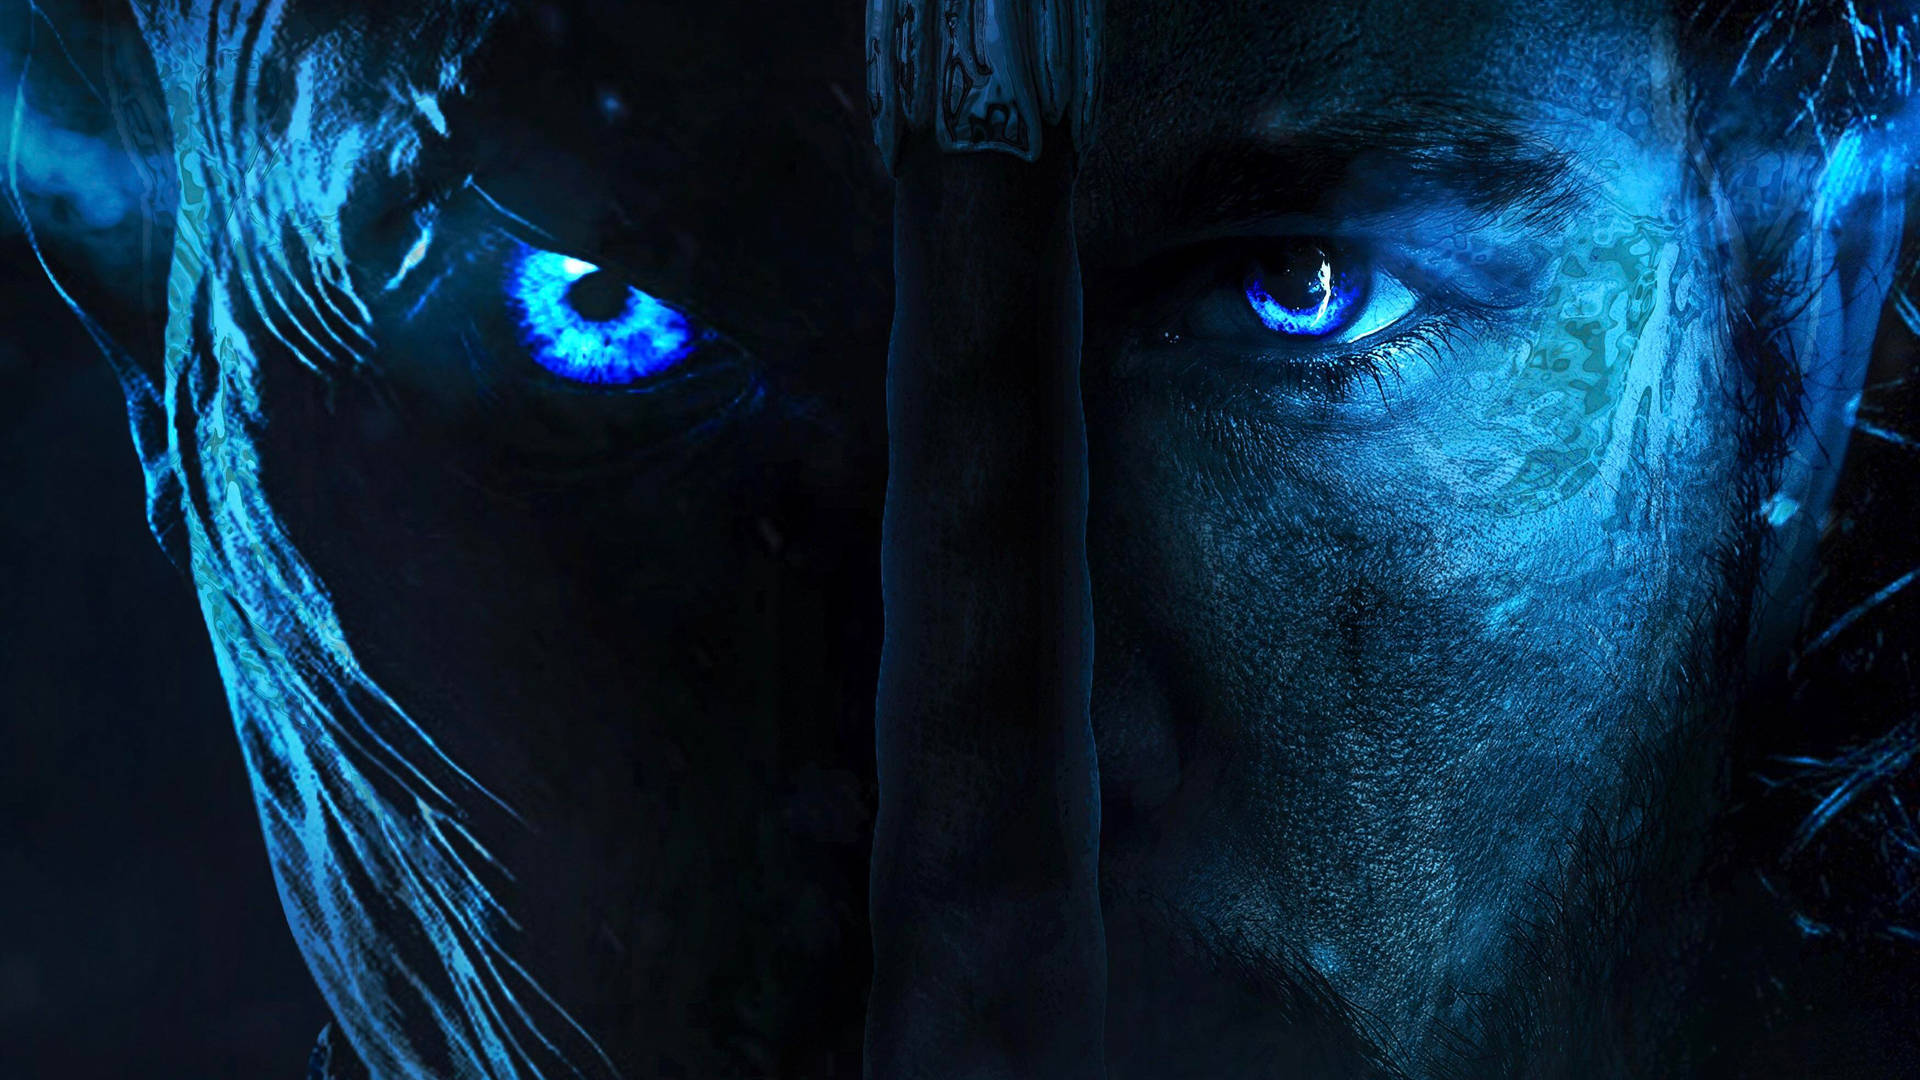 Get Ready for an Epic Final Battle in Game of Thrones Season 8 Wallpaper